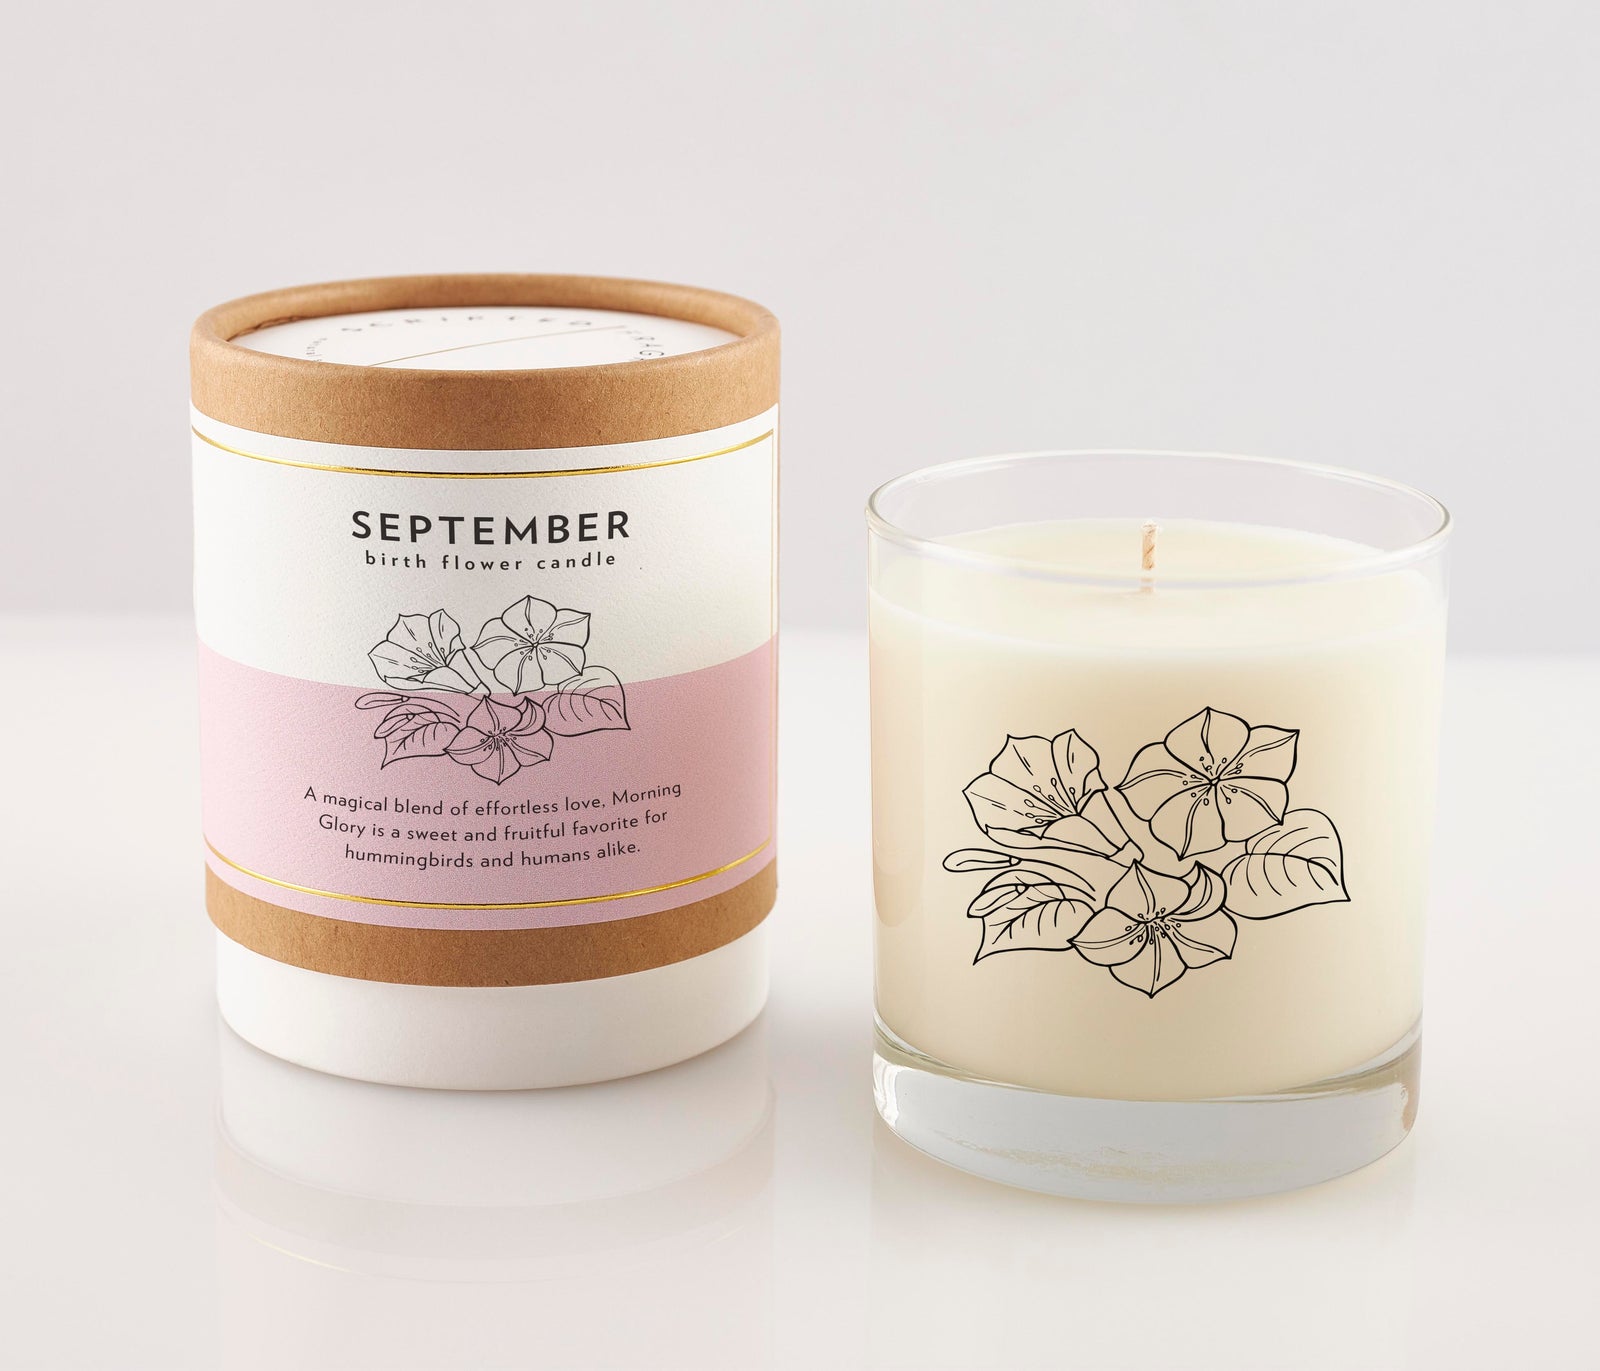 September Birth Month Flower Soy Candle, Morning Glory Candle